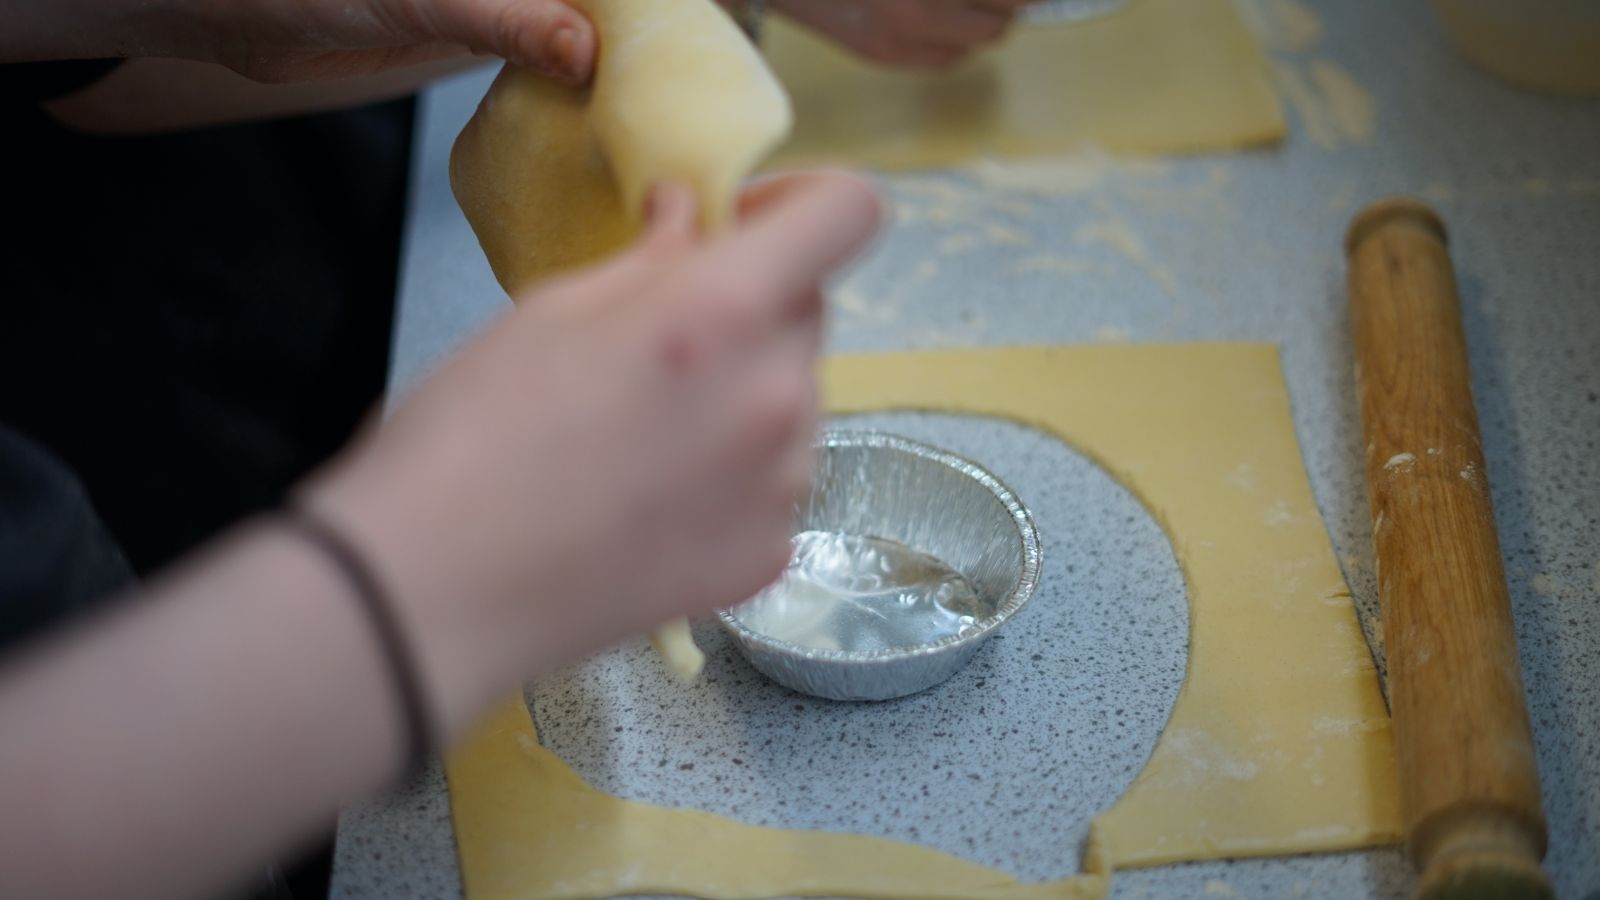 Student cutting the pastry